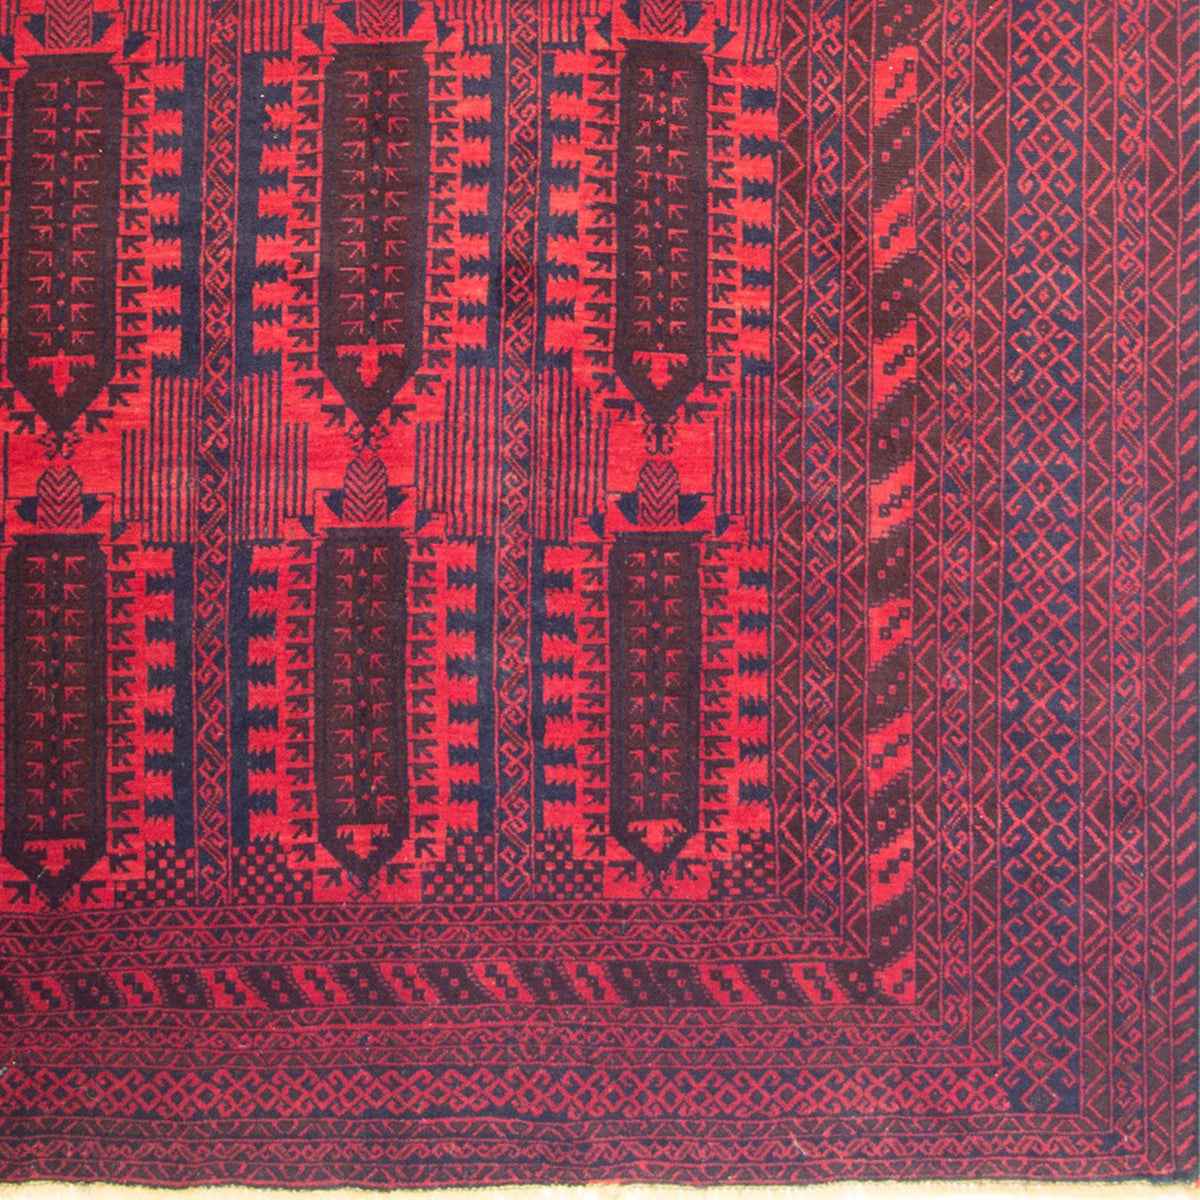 Fine Hand-knotted Persian Wool Baluchi Rug 195cm x 285cm